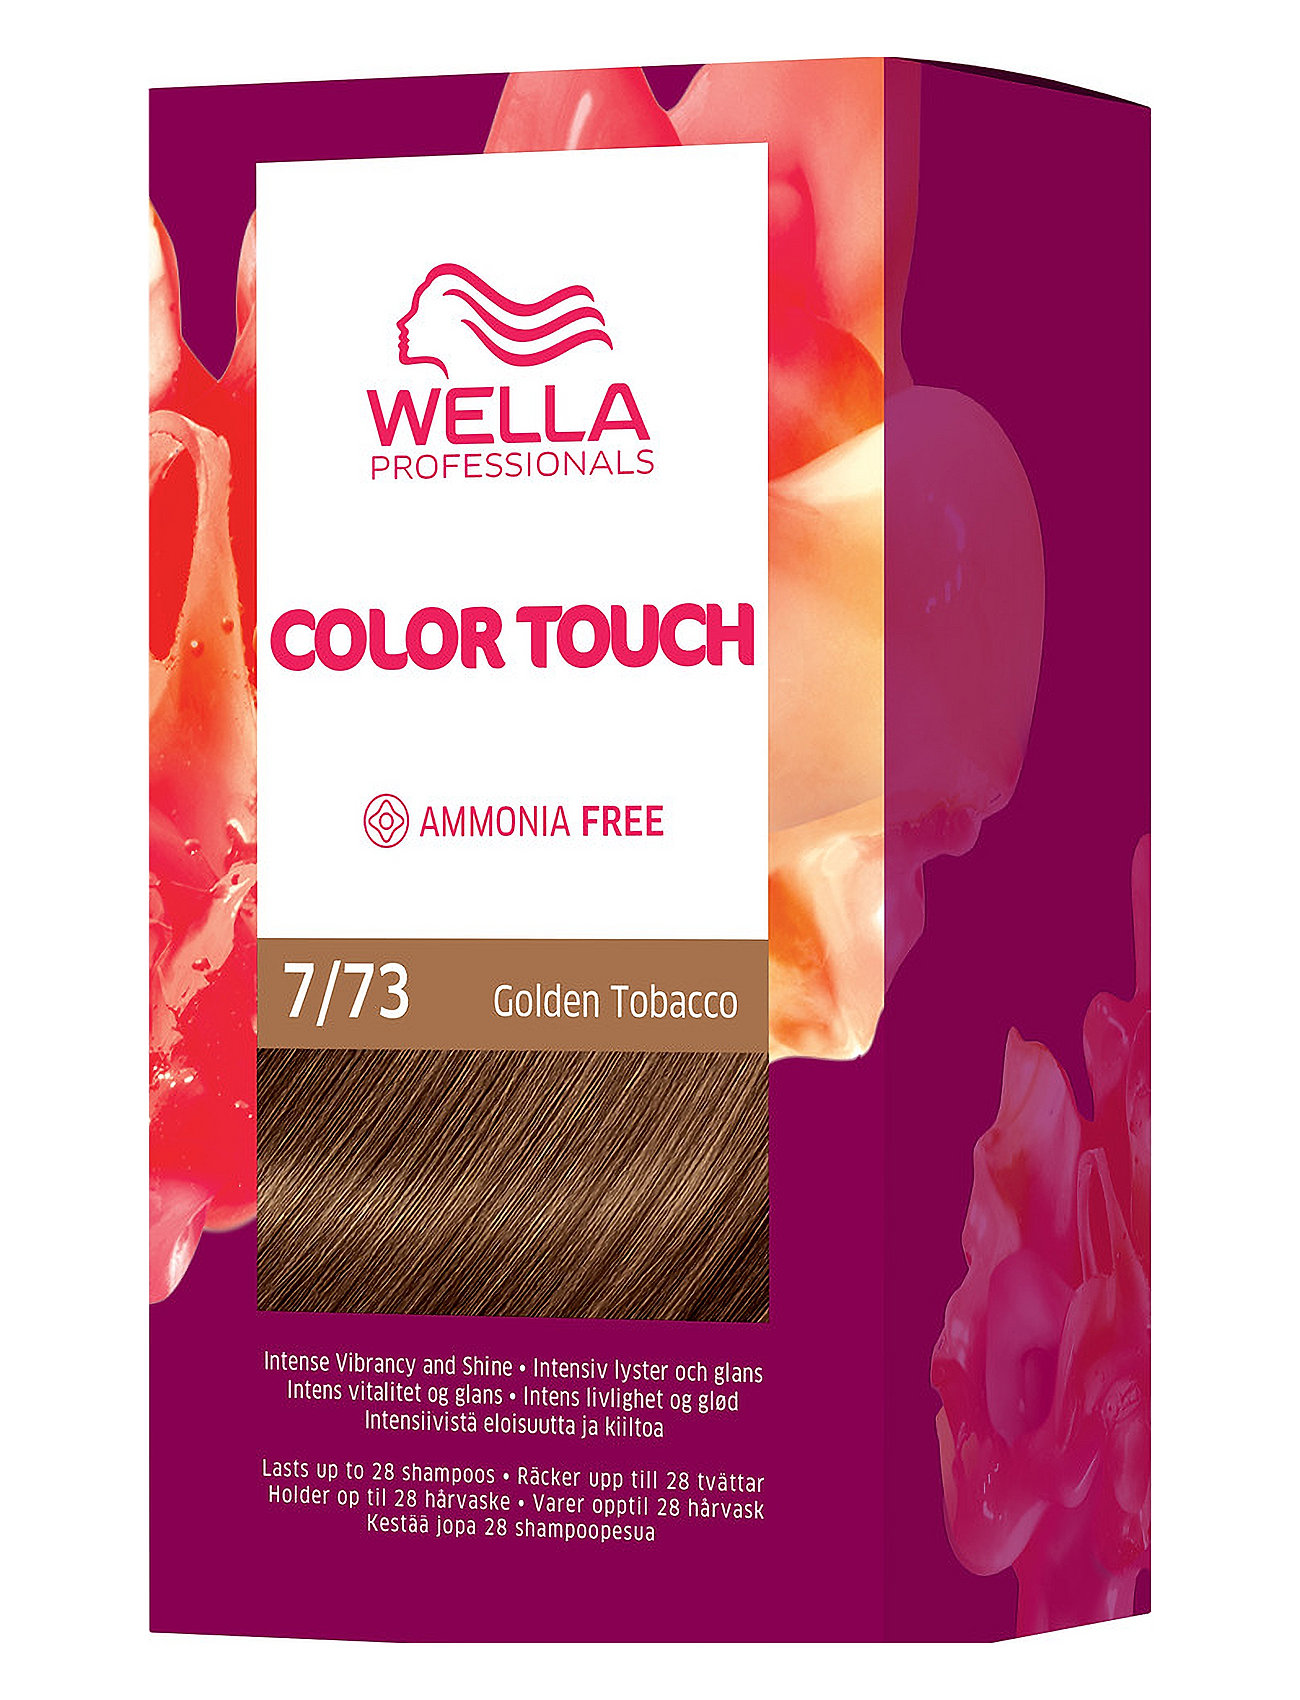 Wella Professionals Color Touch Deep Brown Golden Tobacco 7/73 130 Ml Beauty Women Hair Care Color Treatments Nude Wella Professionals